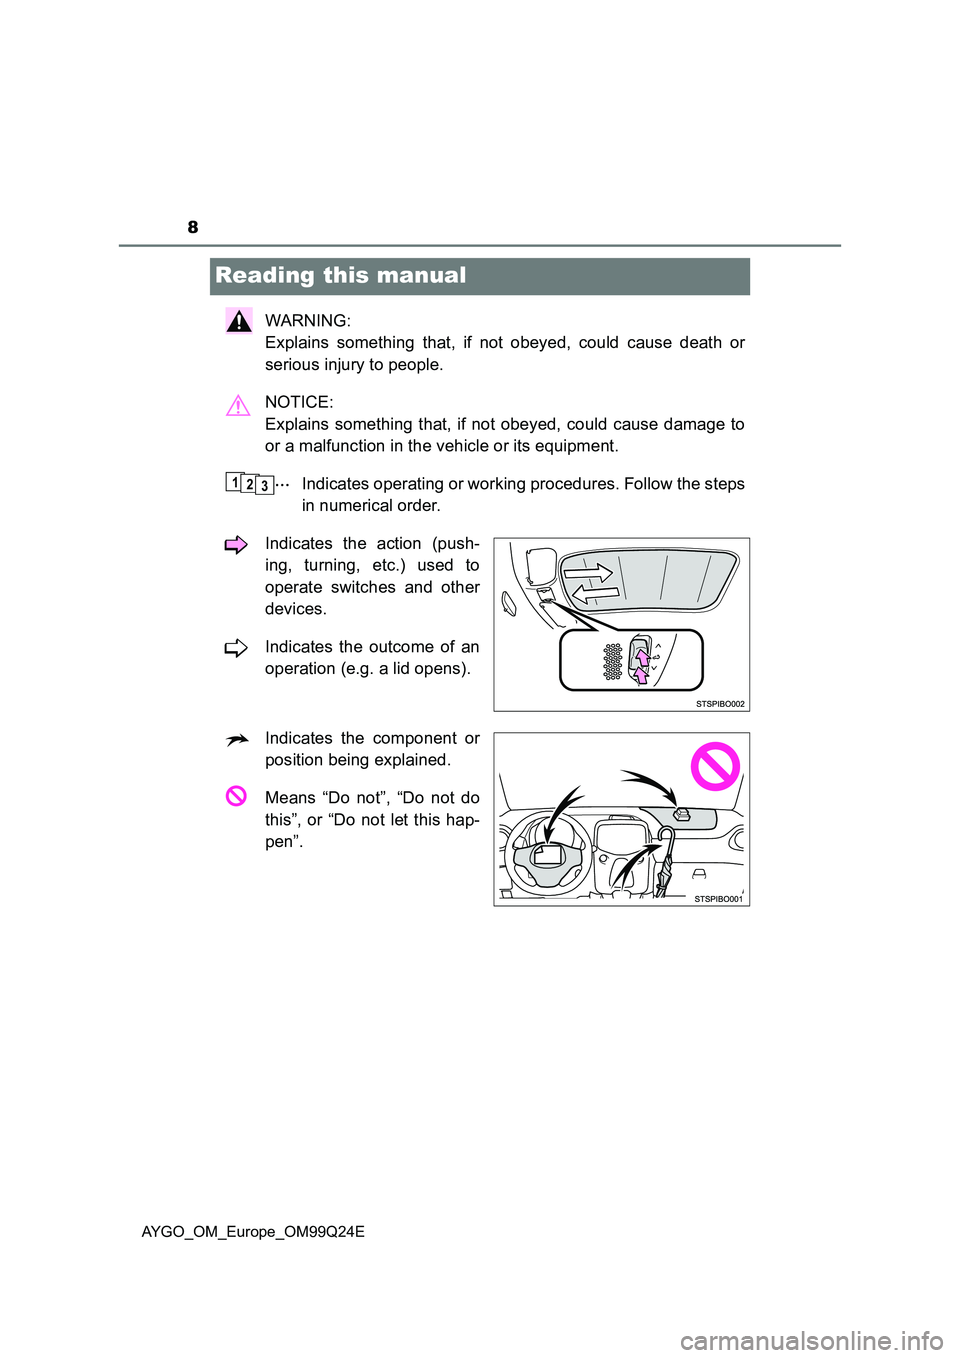 TOYOTA AYGO 2017  Owners Manual (in English) 8
AYGO_OM_Europe_OM99Q24E
Reading this manual
WARNING:  
Explains something that, if not obeyed, could cause death or 
serious injury to people. 
NOTICE:  
Explains something that, if not obeyed, coul